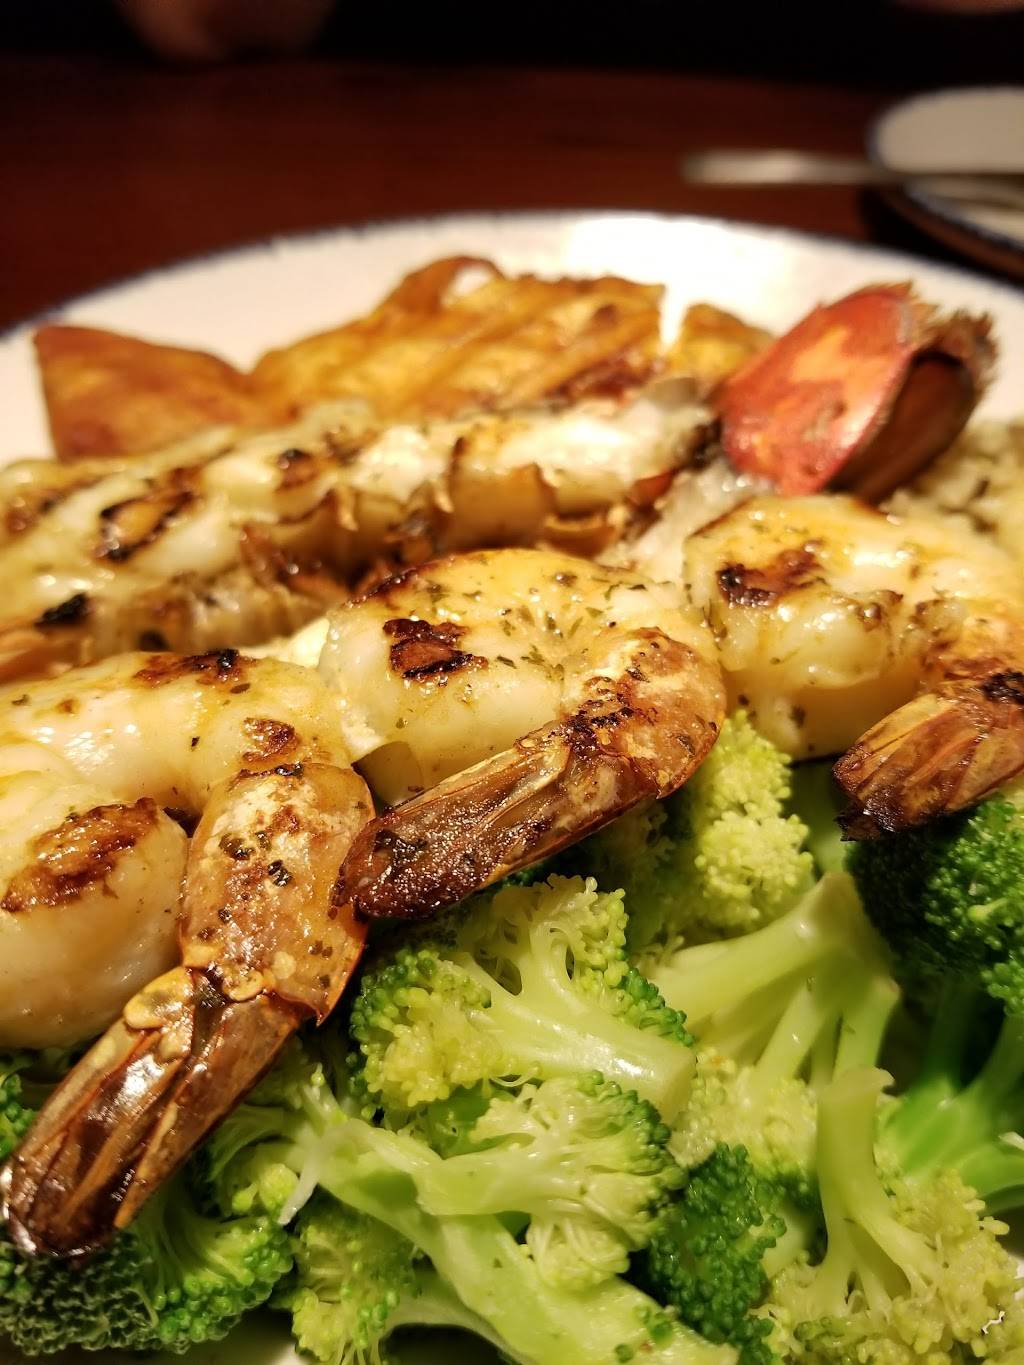 Red Lobster Restaurant 2255 South Rd Poughkeepsie Ny 12601 Usa [ 1365 x 1024 Pixel ]